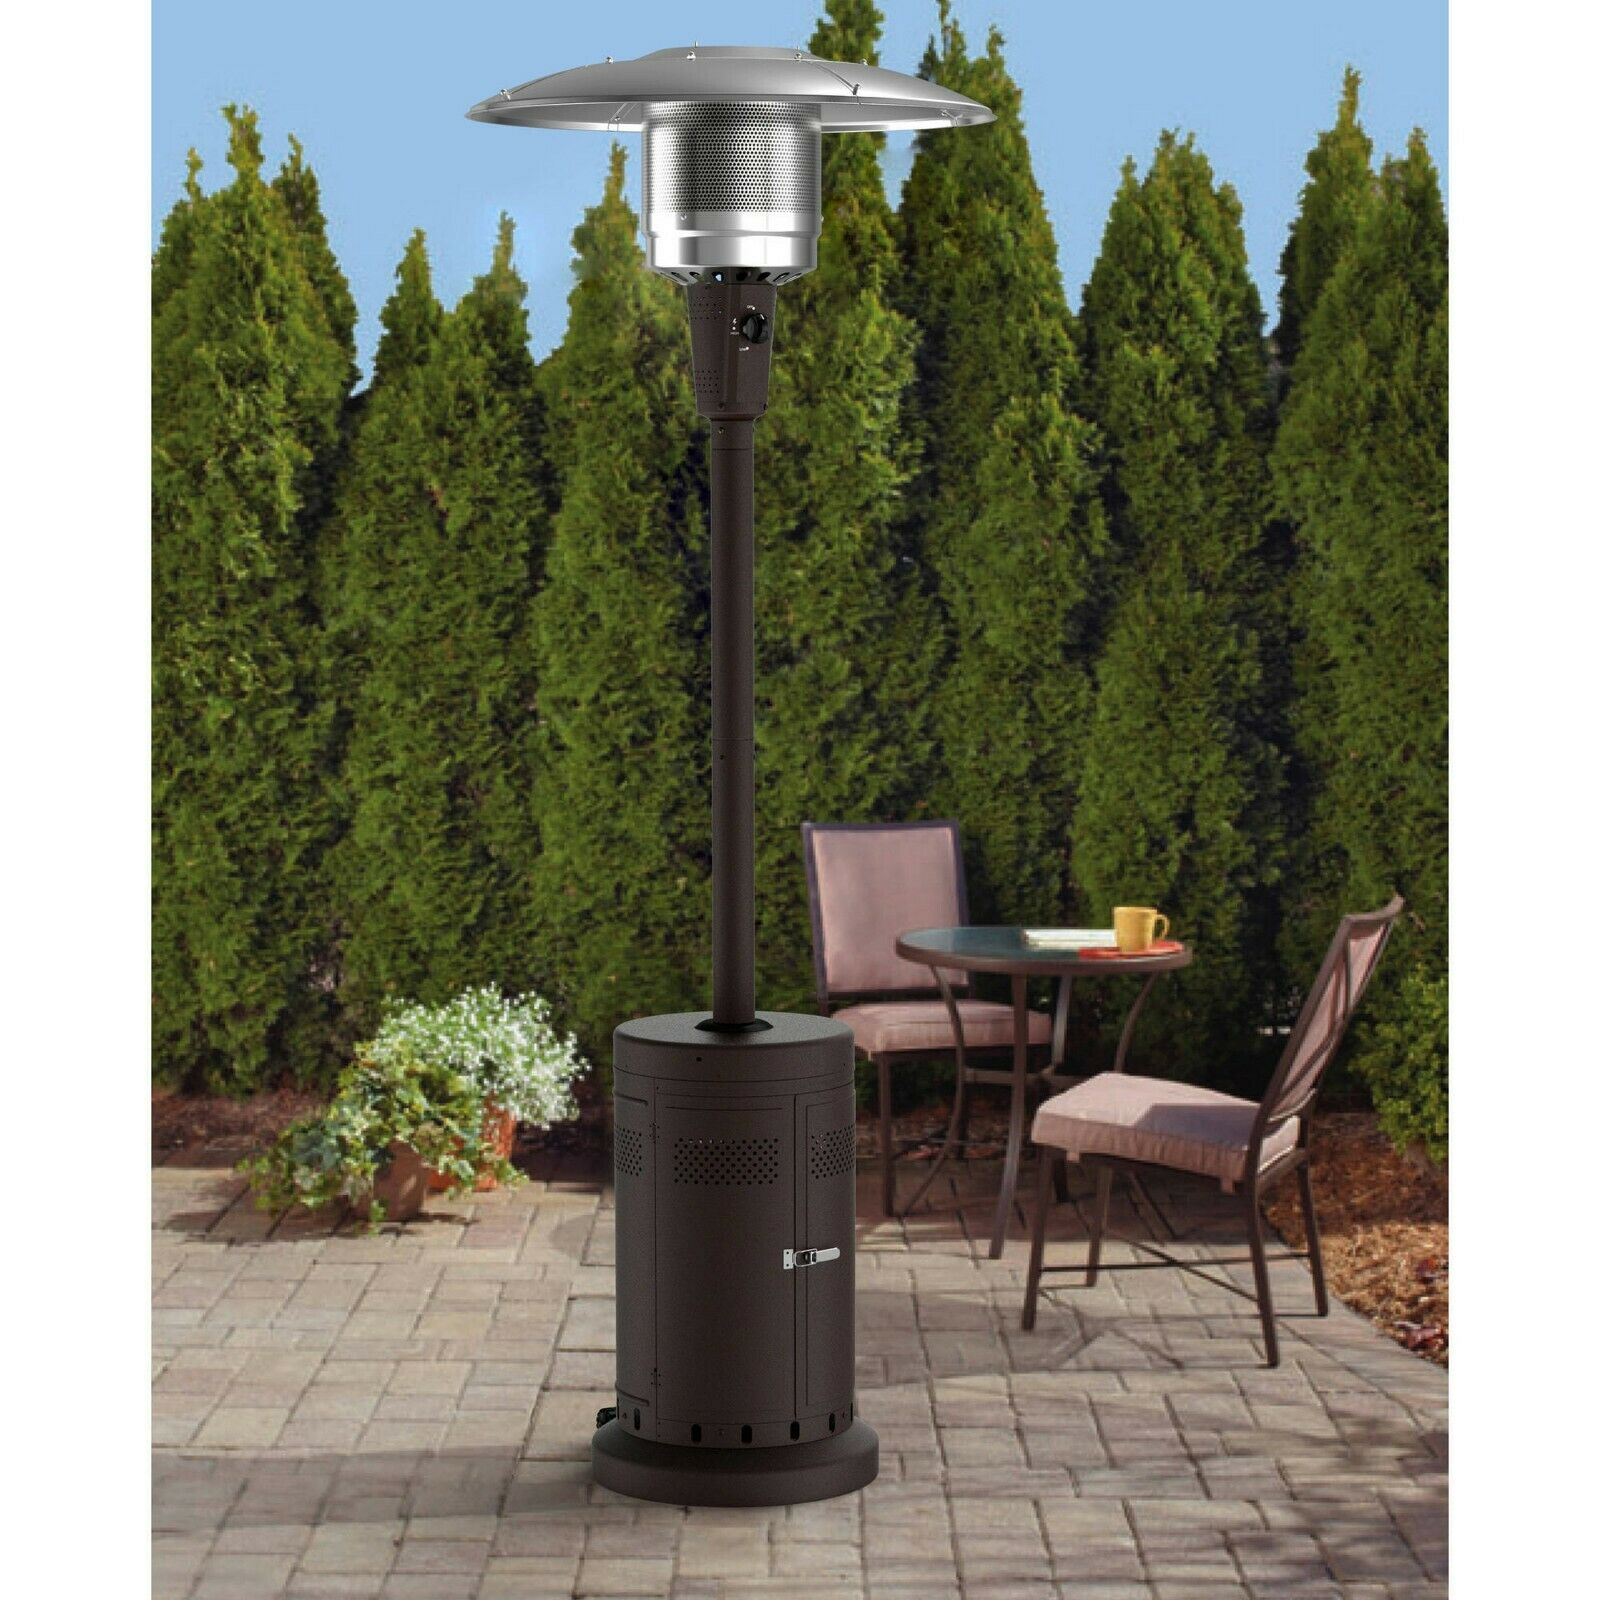 Outdoor Raised Patio Heater Mushroom Large Fire Pit Furniture Garden Deck Tall throughout sizing 1600 X 1600